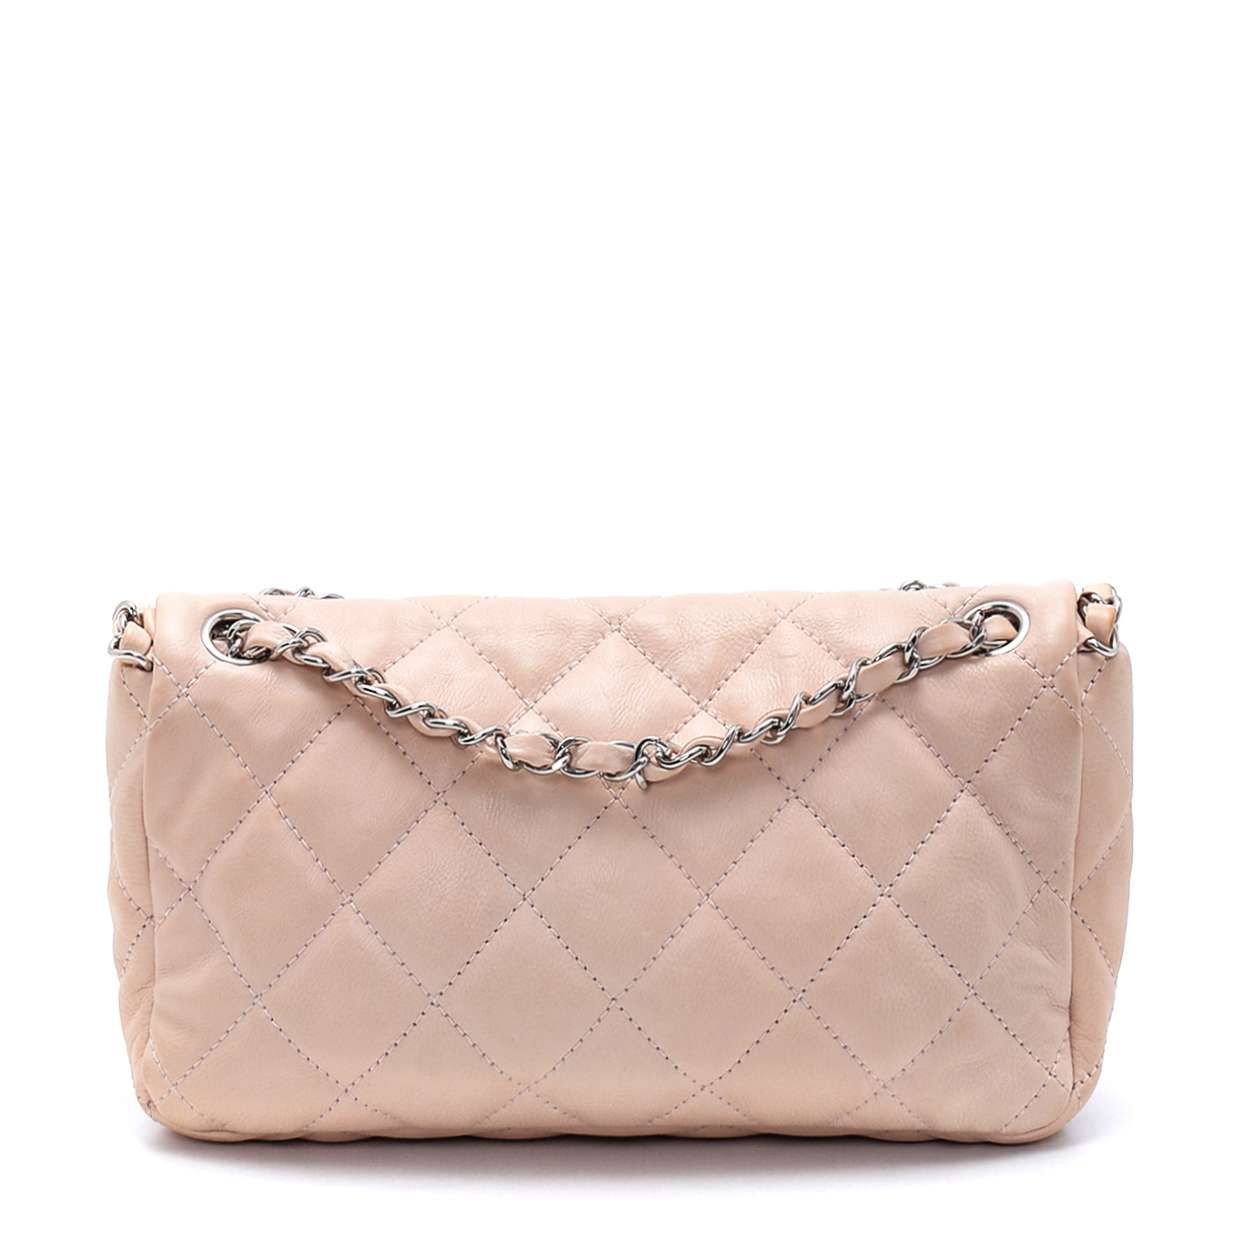 Chanel - Nude Lambskin Leather Quilted Chain Flap Bag